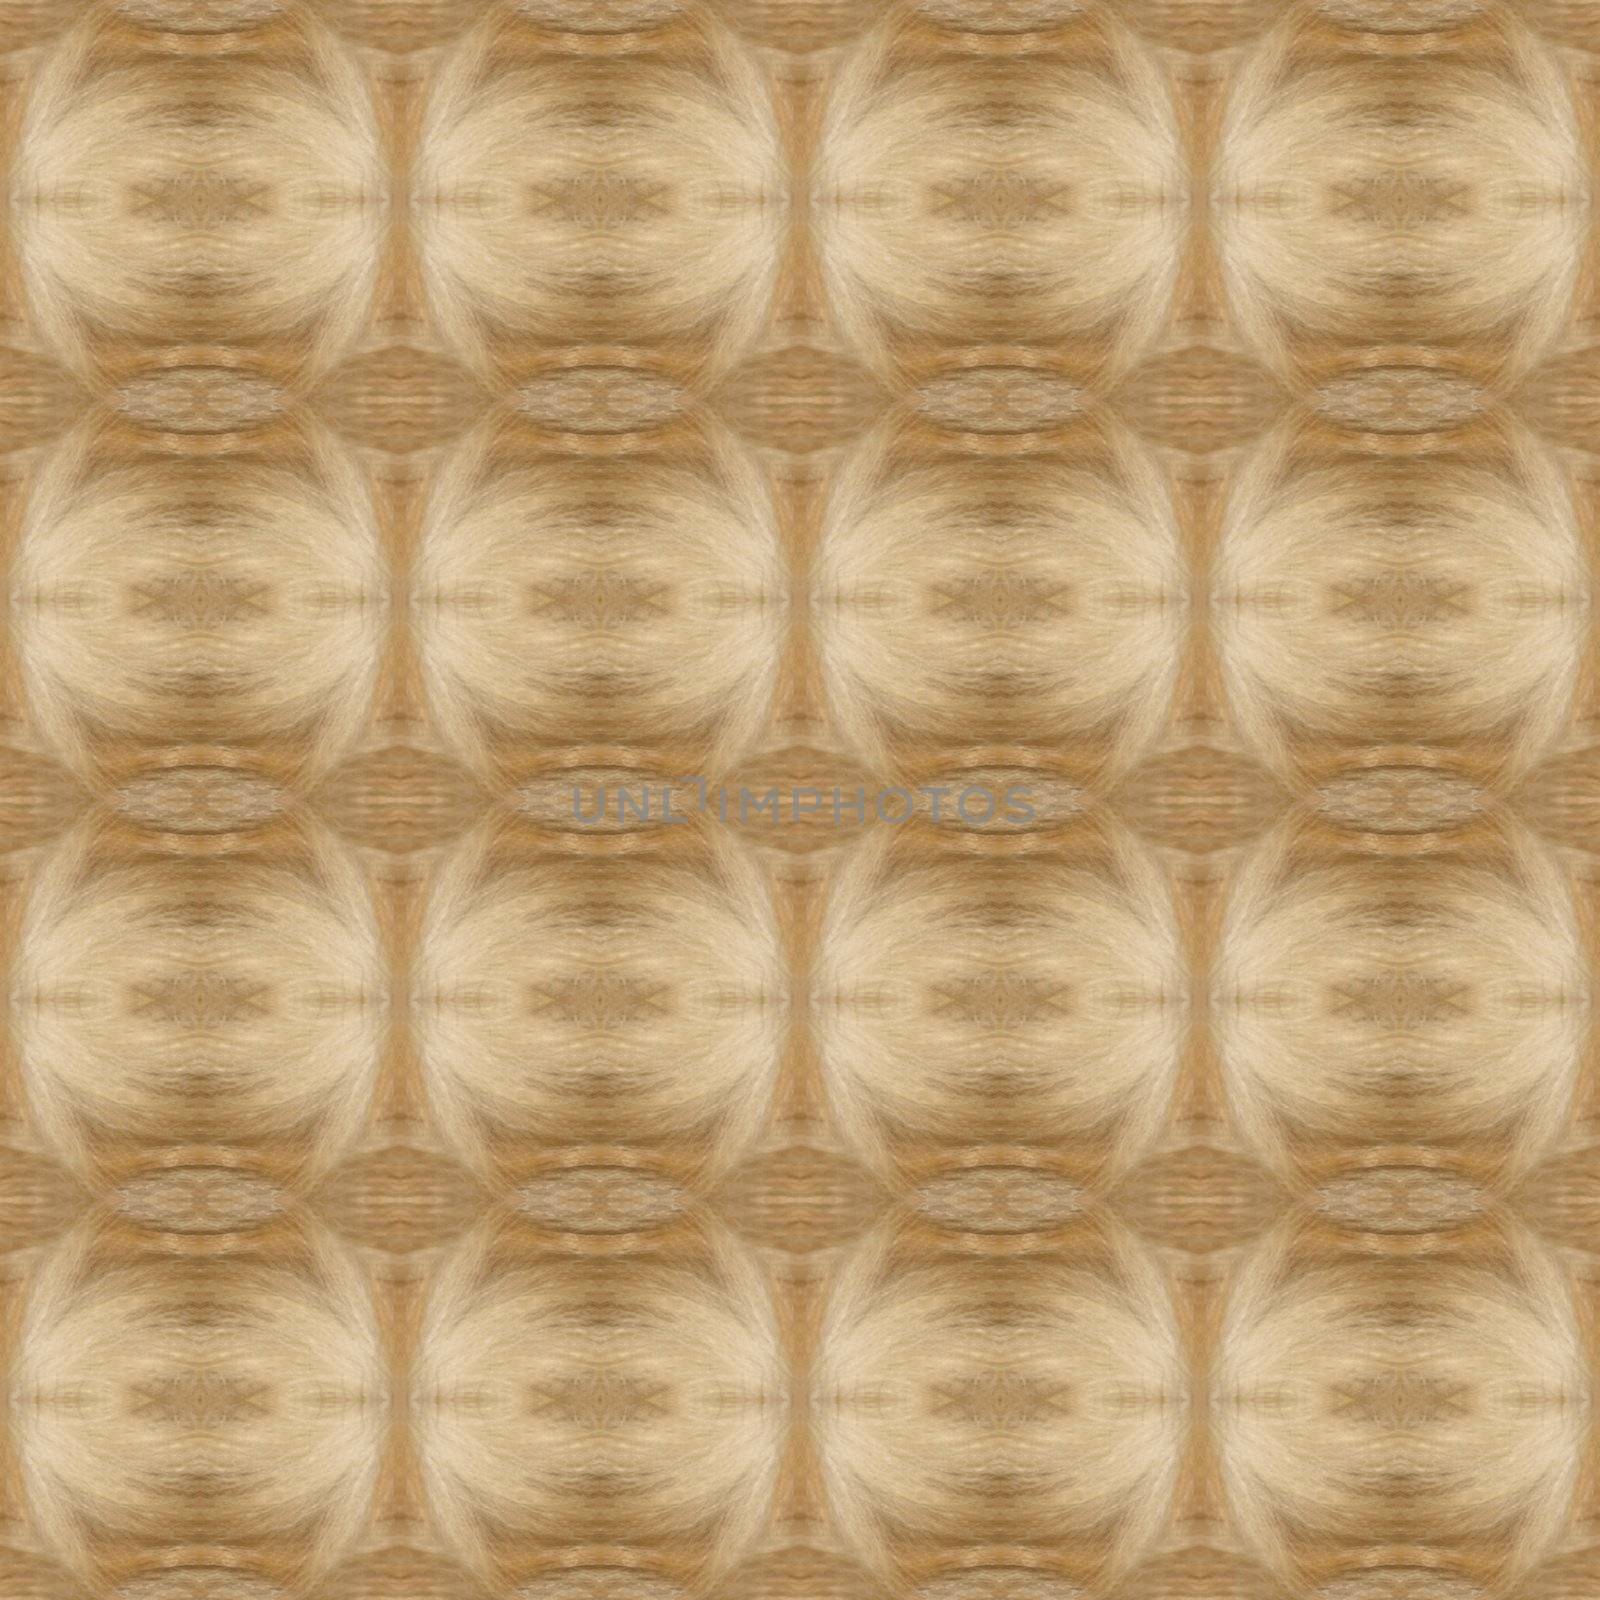 Beige Seamless Border or Background Tiles by Nonboe